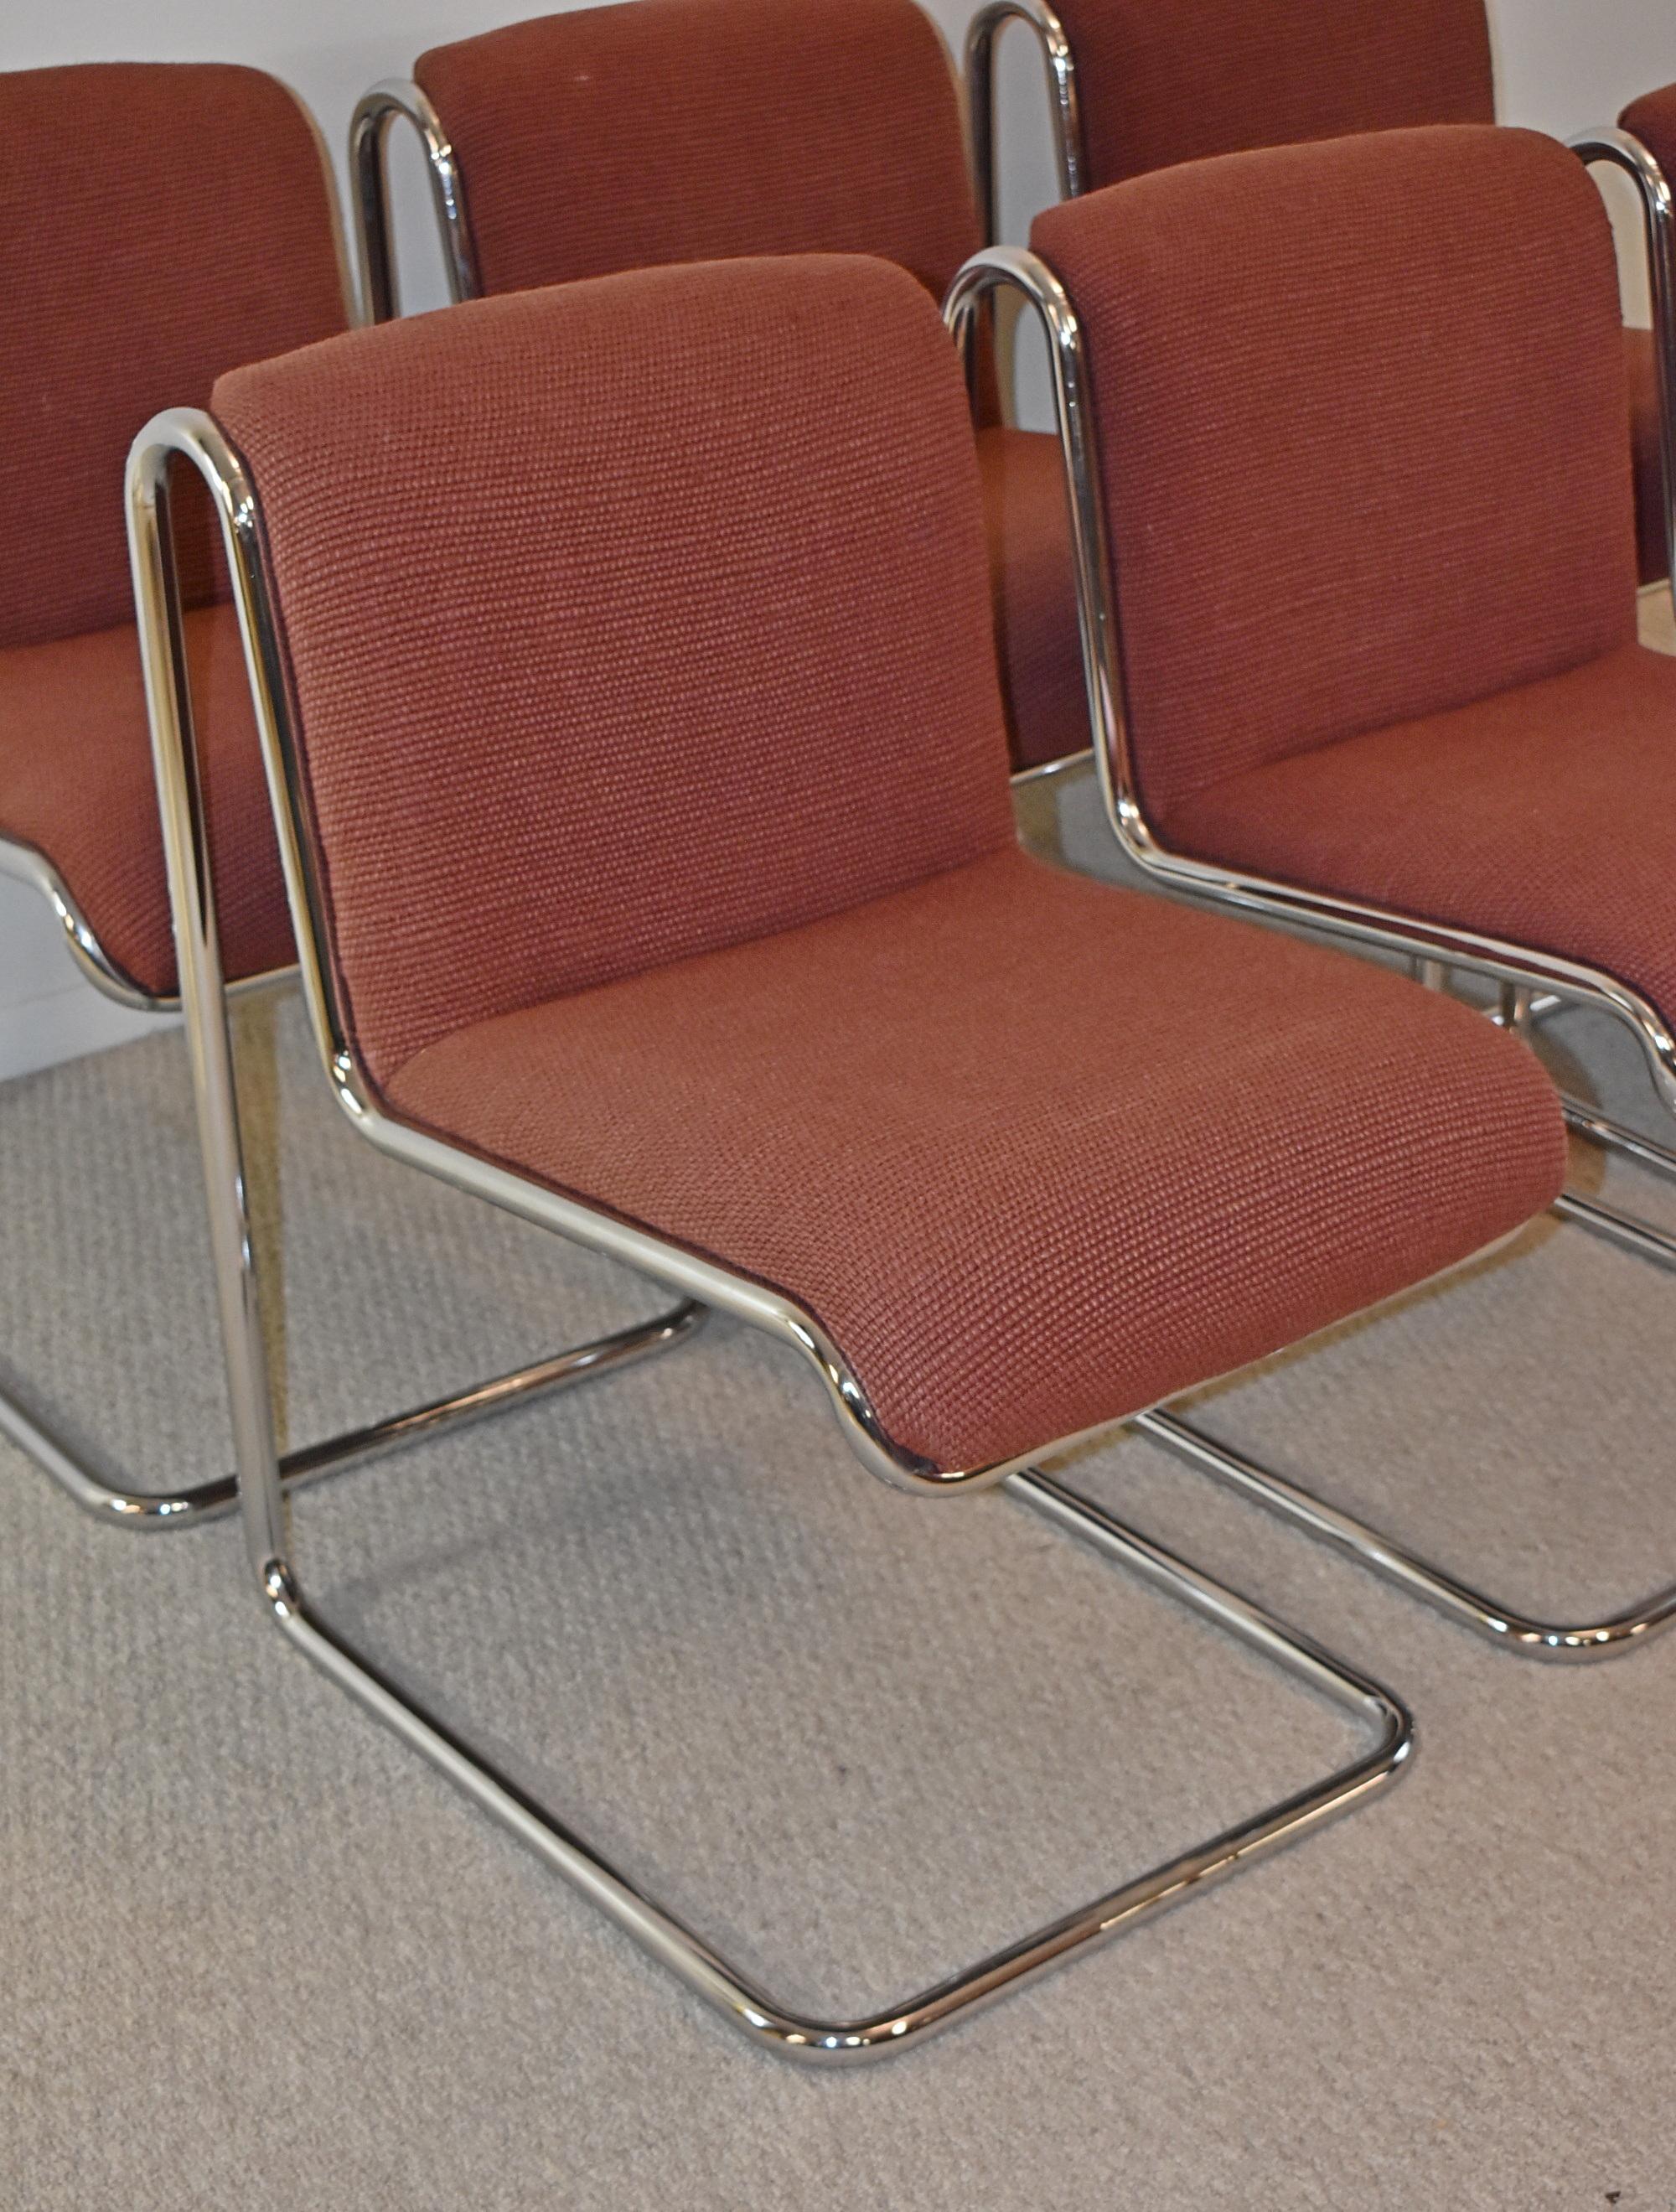 Set of 6 thonet chrome upholstered dining chairs. 1970s Reverse catilevered tubular chrome frame Bahaus design. Heavy wool upholstering in good condition. No rust or chrome damage. Label is on the chairs. Dimensions: 32